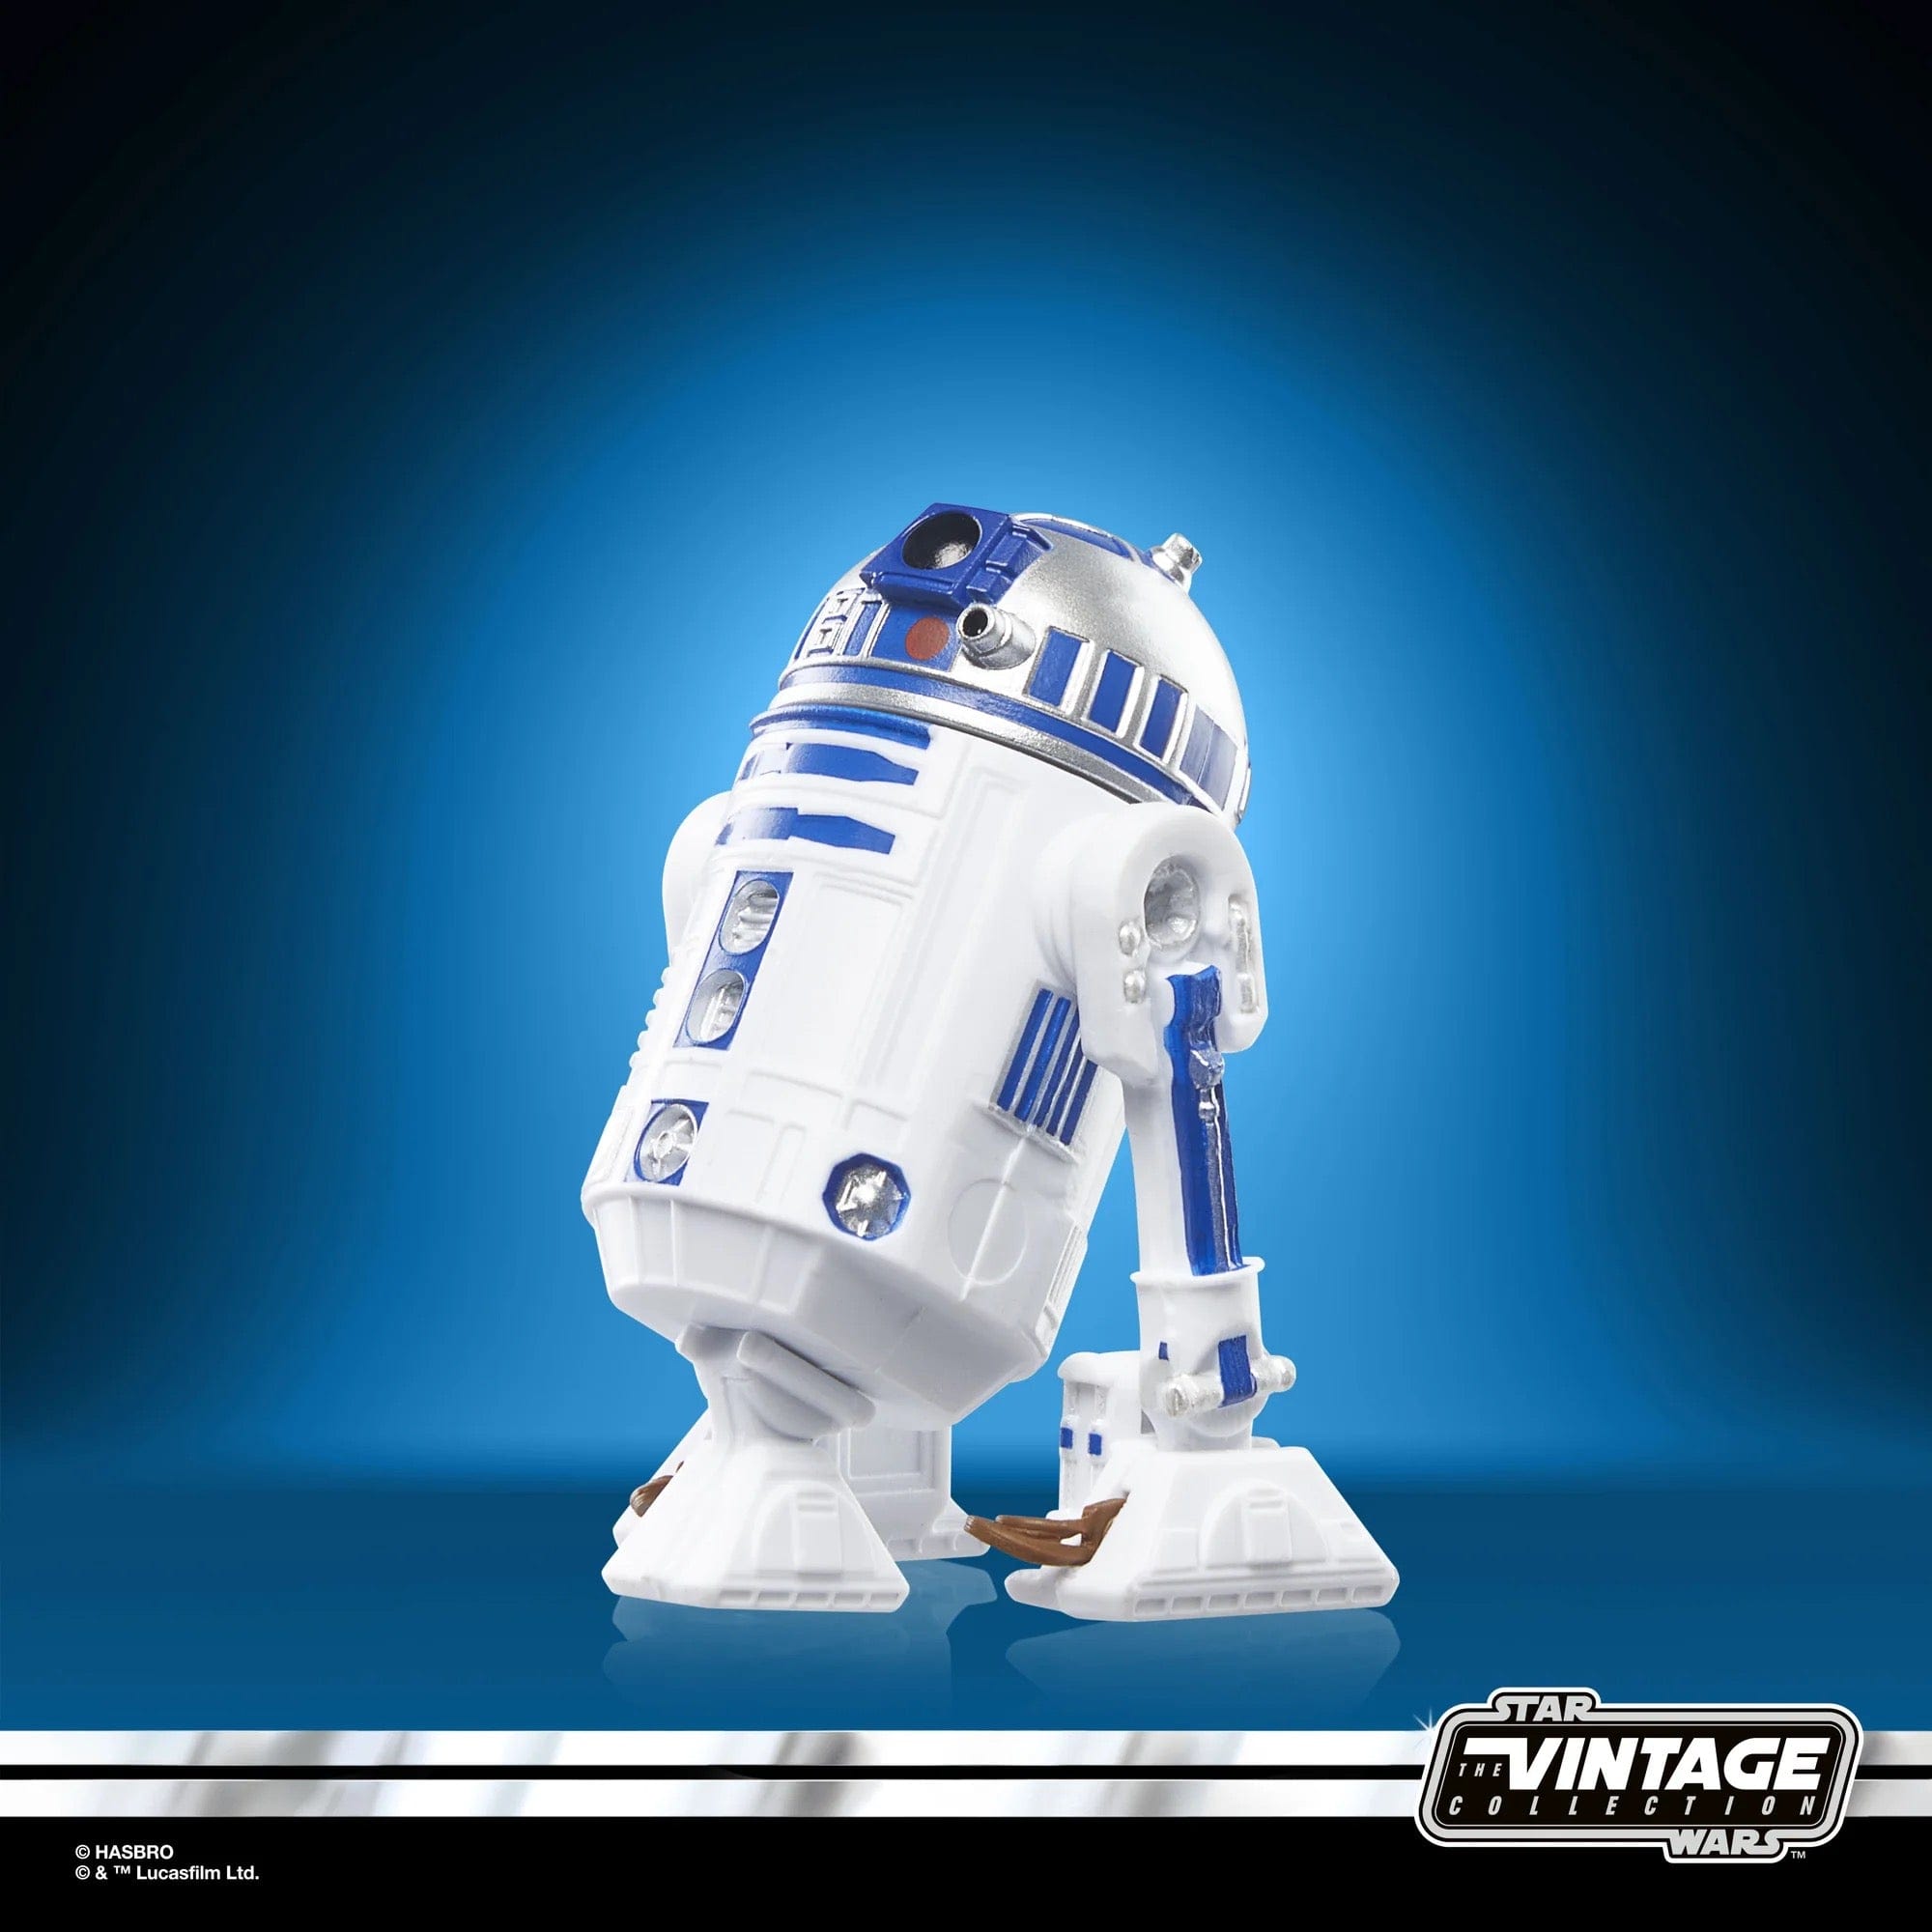 Hasbro Star Wars The Vintage Collection A New Hope R2-D2 Action Figure